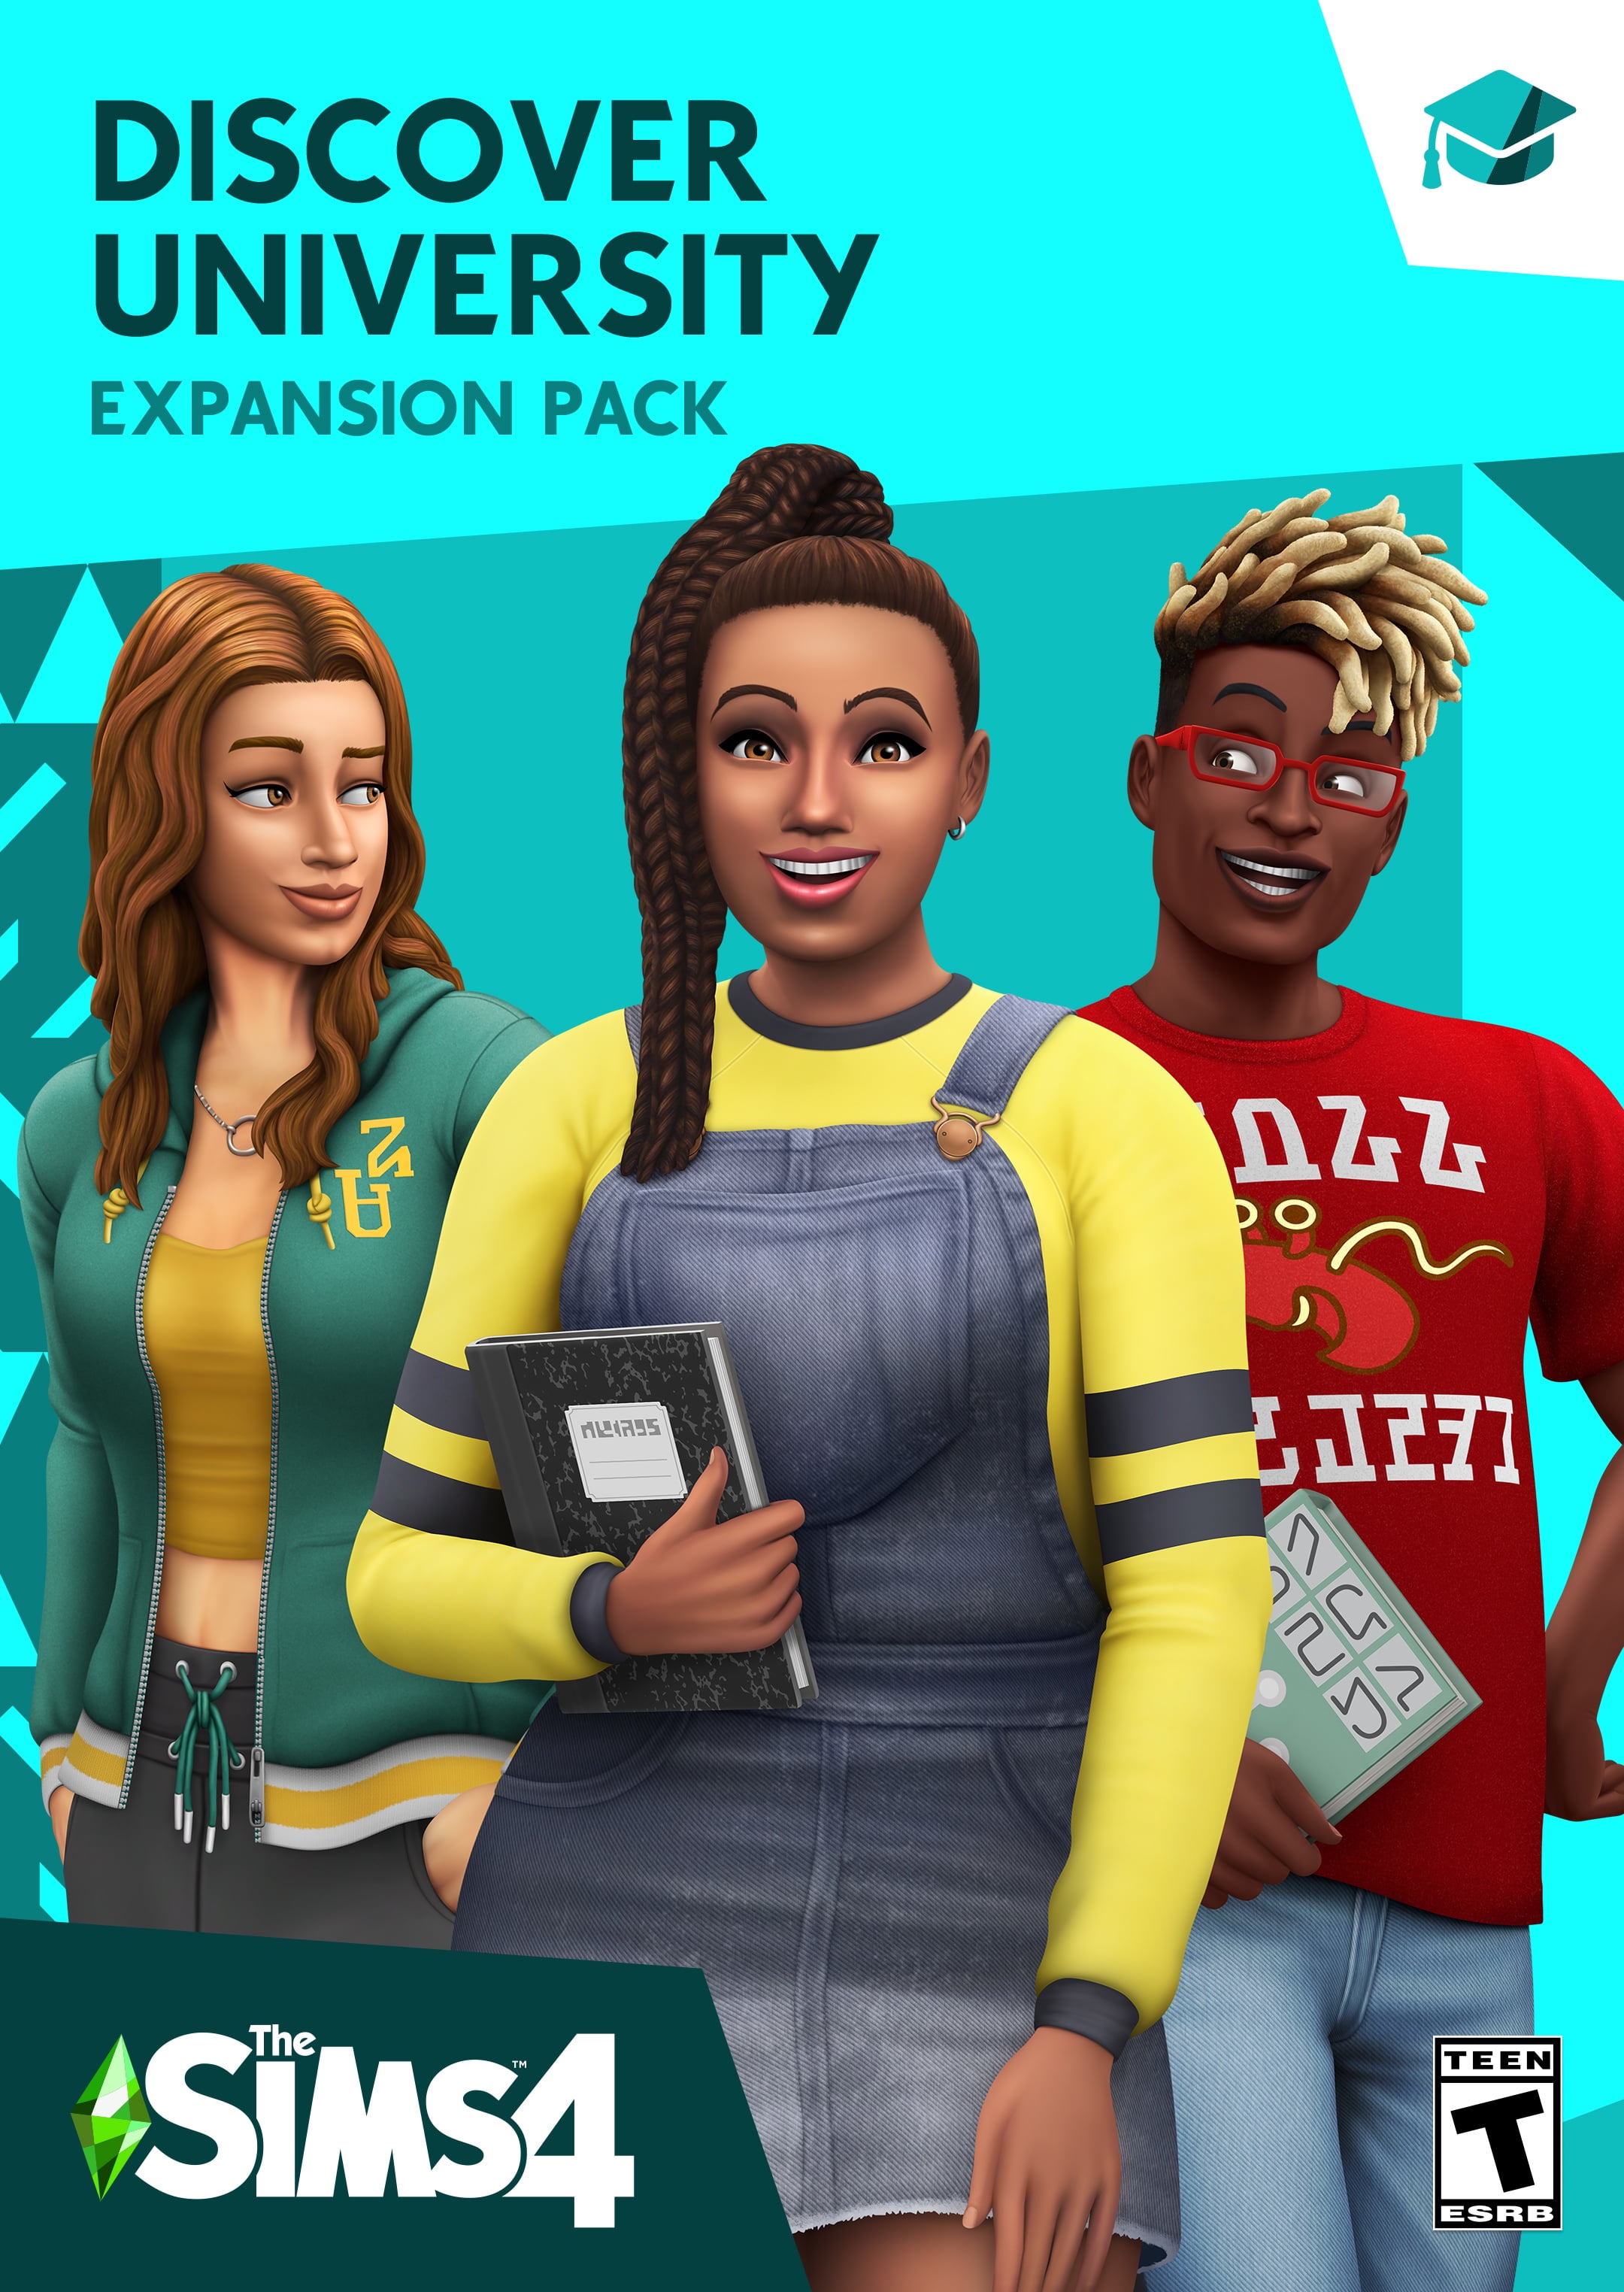 The Sims 4 Discover University Expansion Pack, Electronic Arts, PC ...
